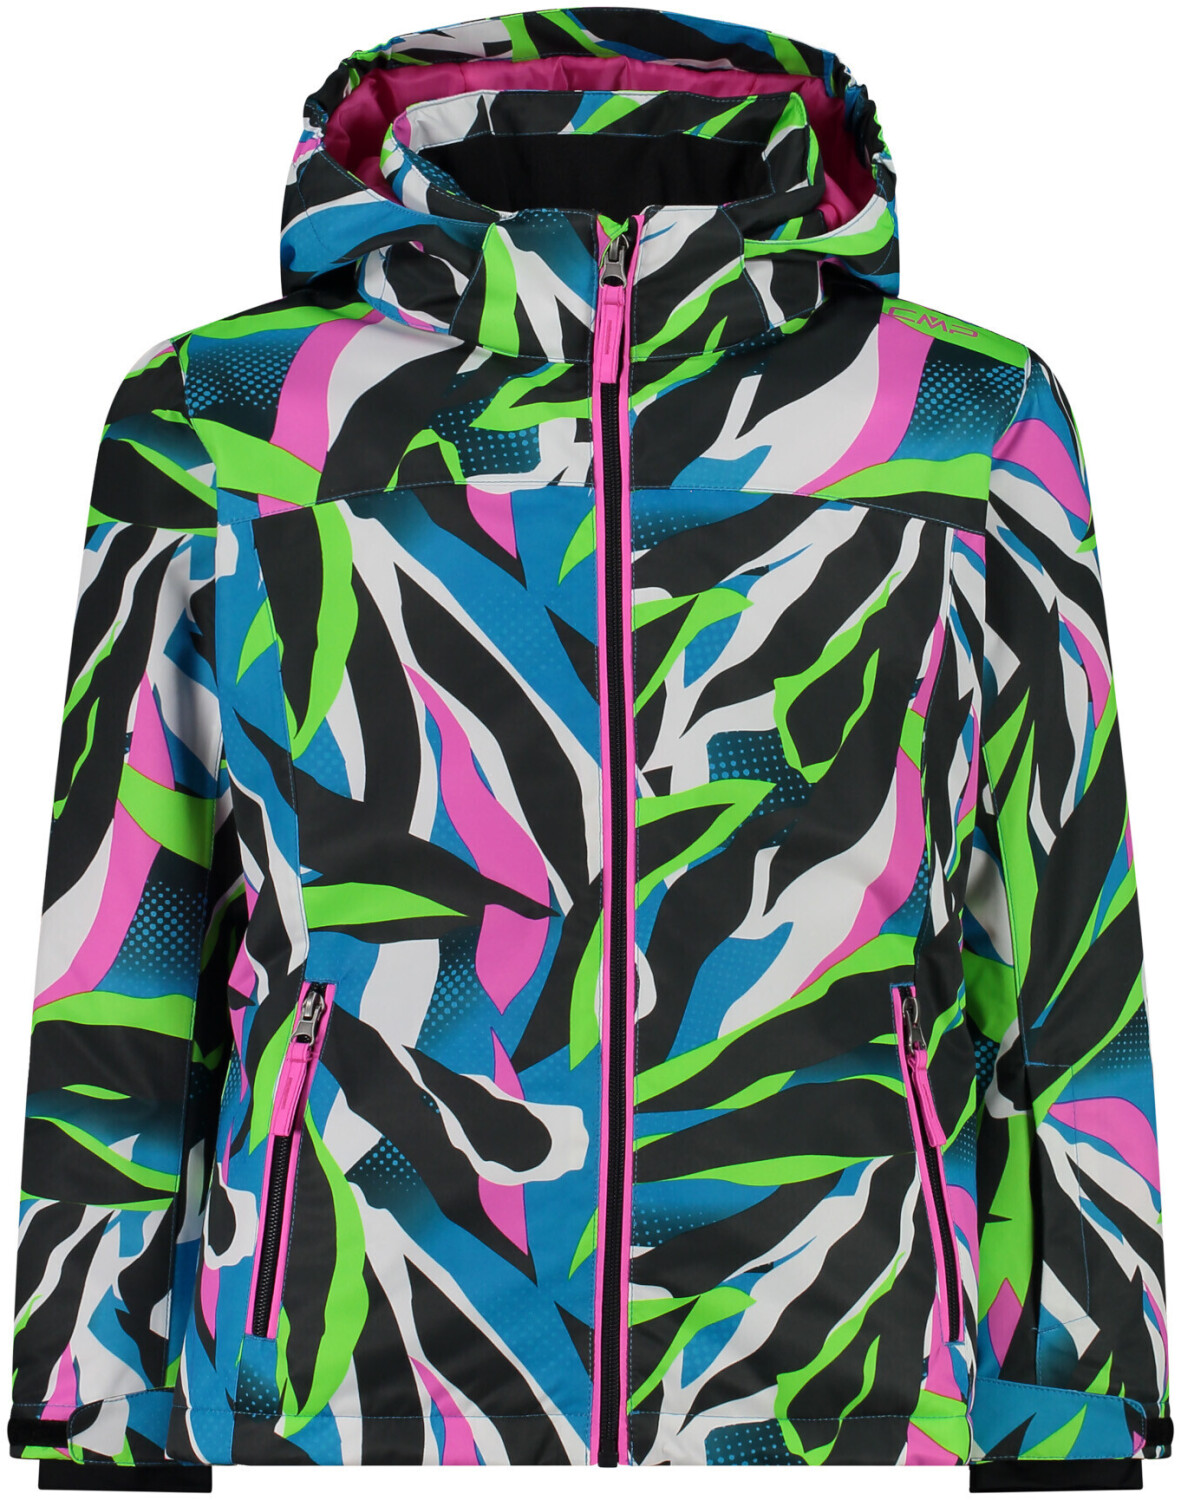 Best (Today) fluo/turchese Deals purple – Girl on Snaps CMP Buy Jacket £30.99 (39W2085) from